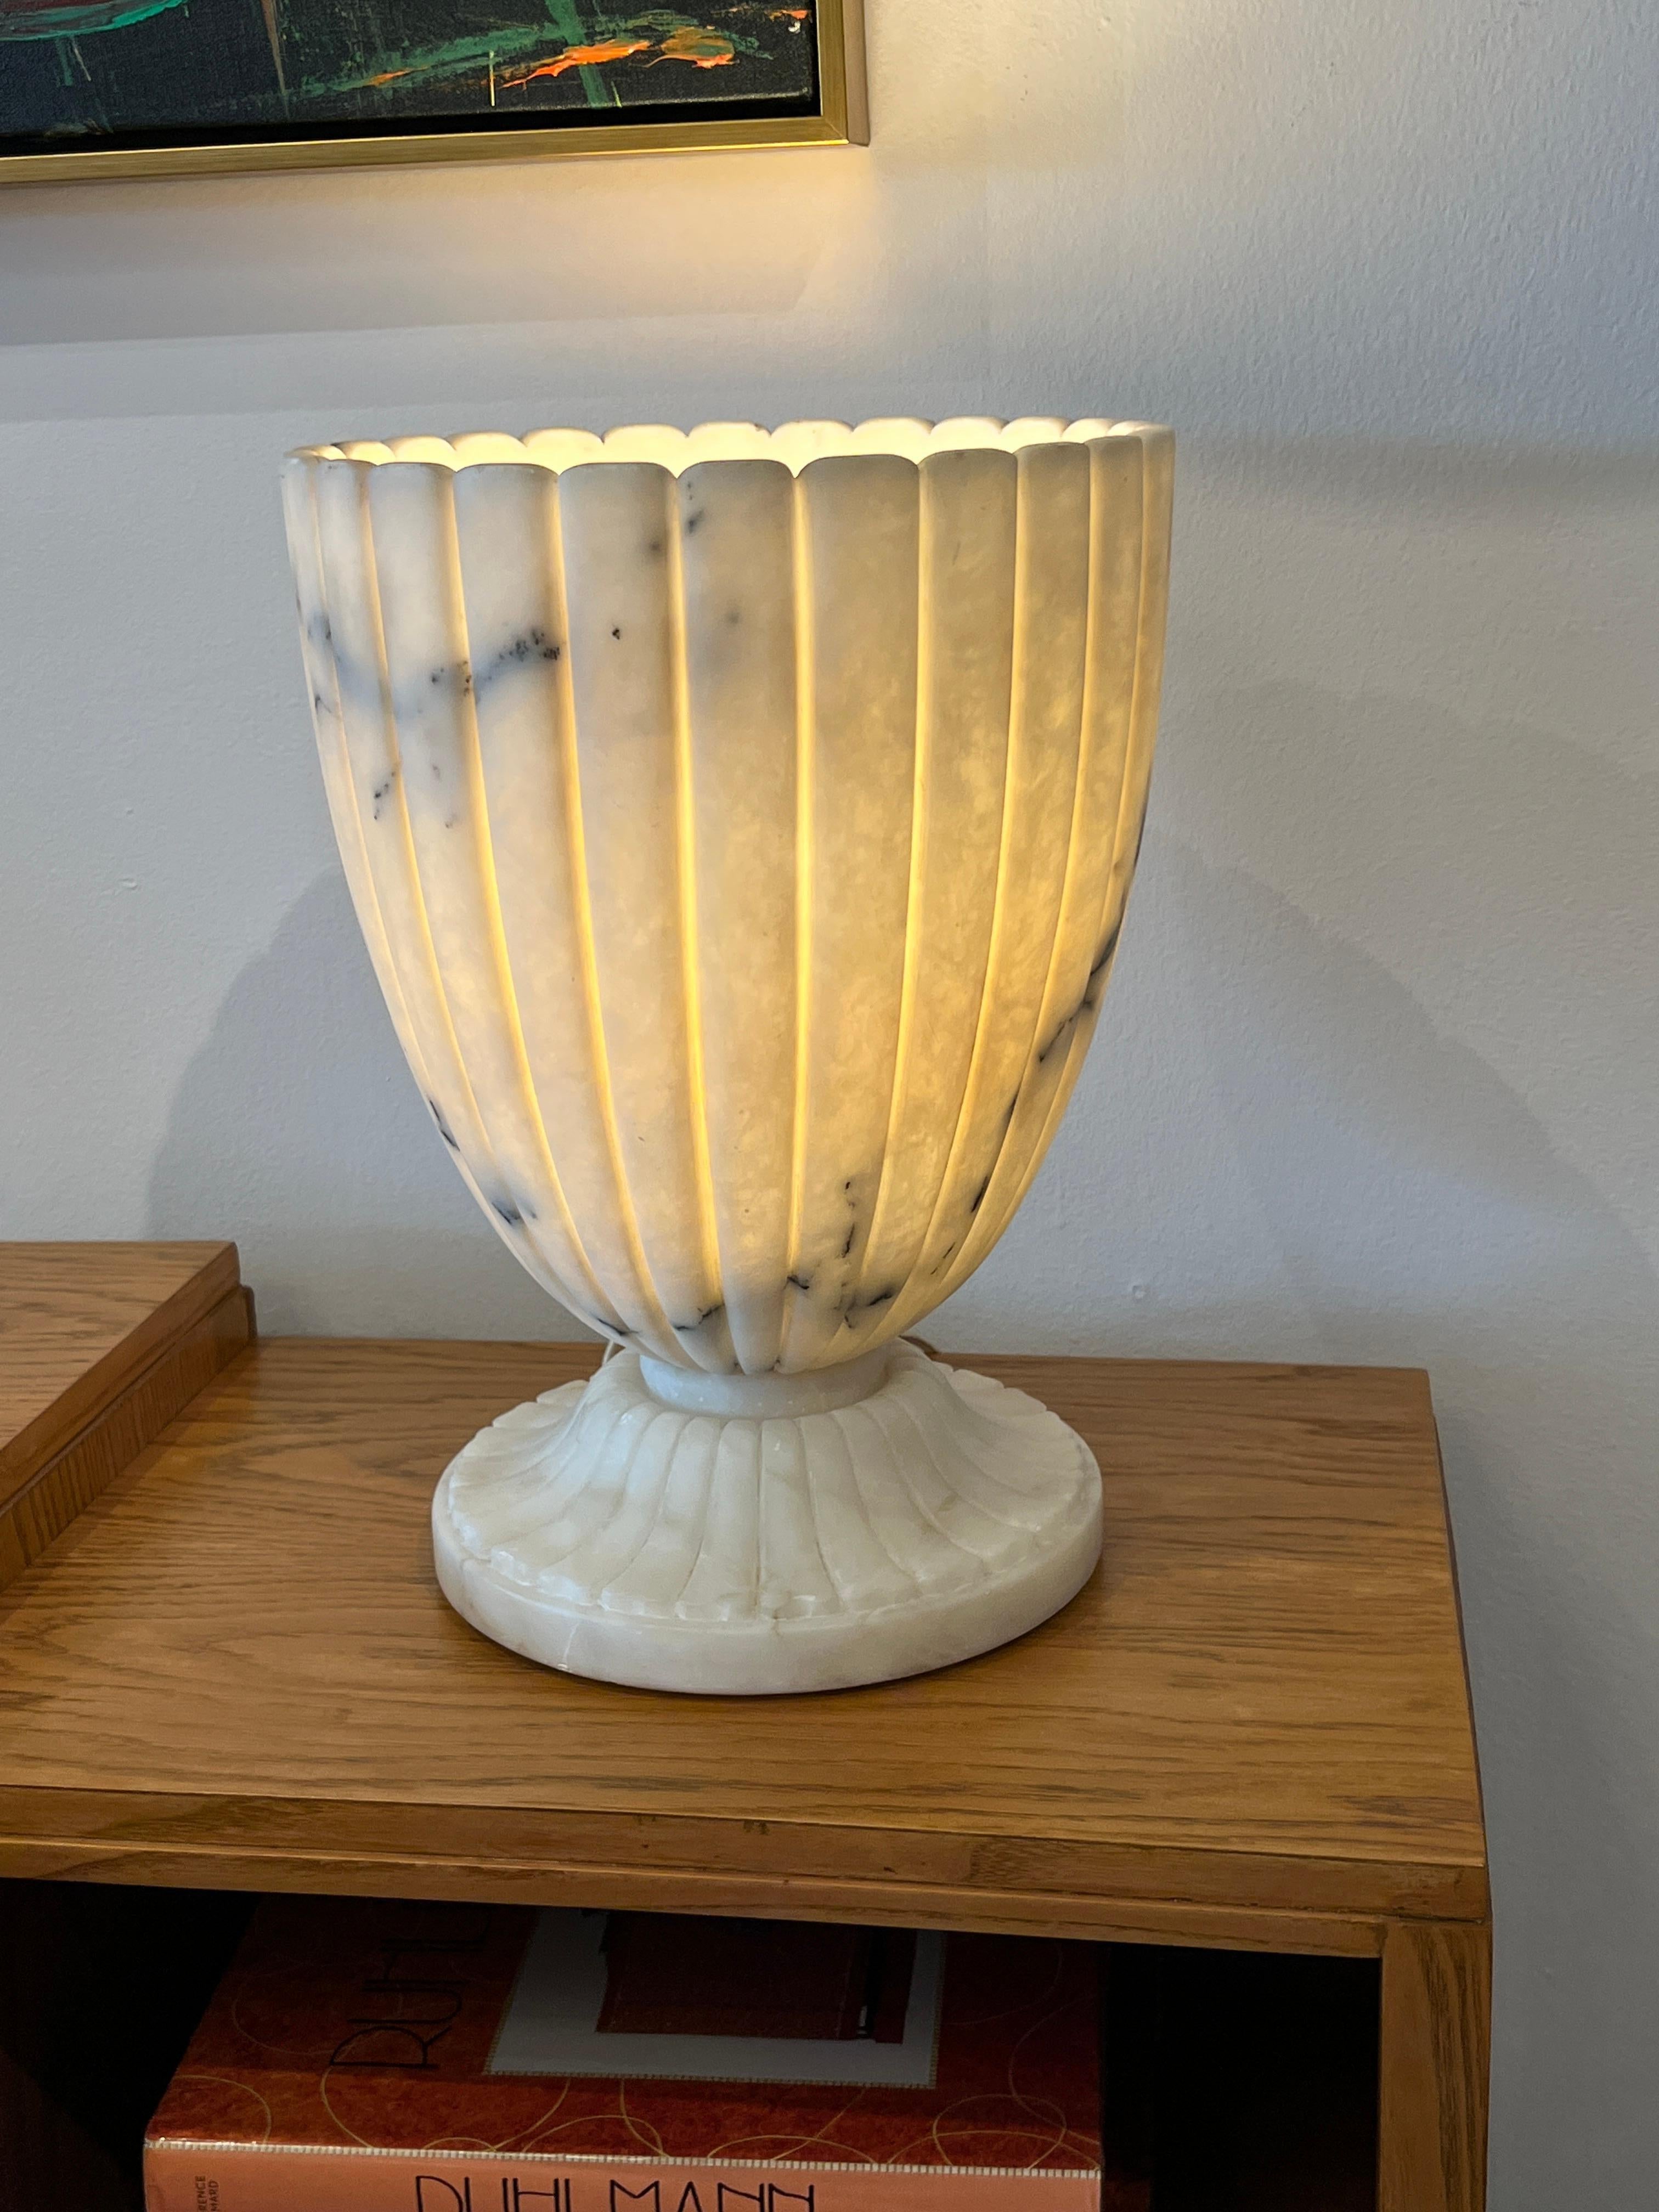 An Art Deco Scalloped design Alabaster table lamp.
Made in France.
Circa: 1940.